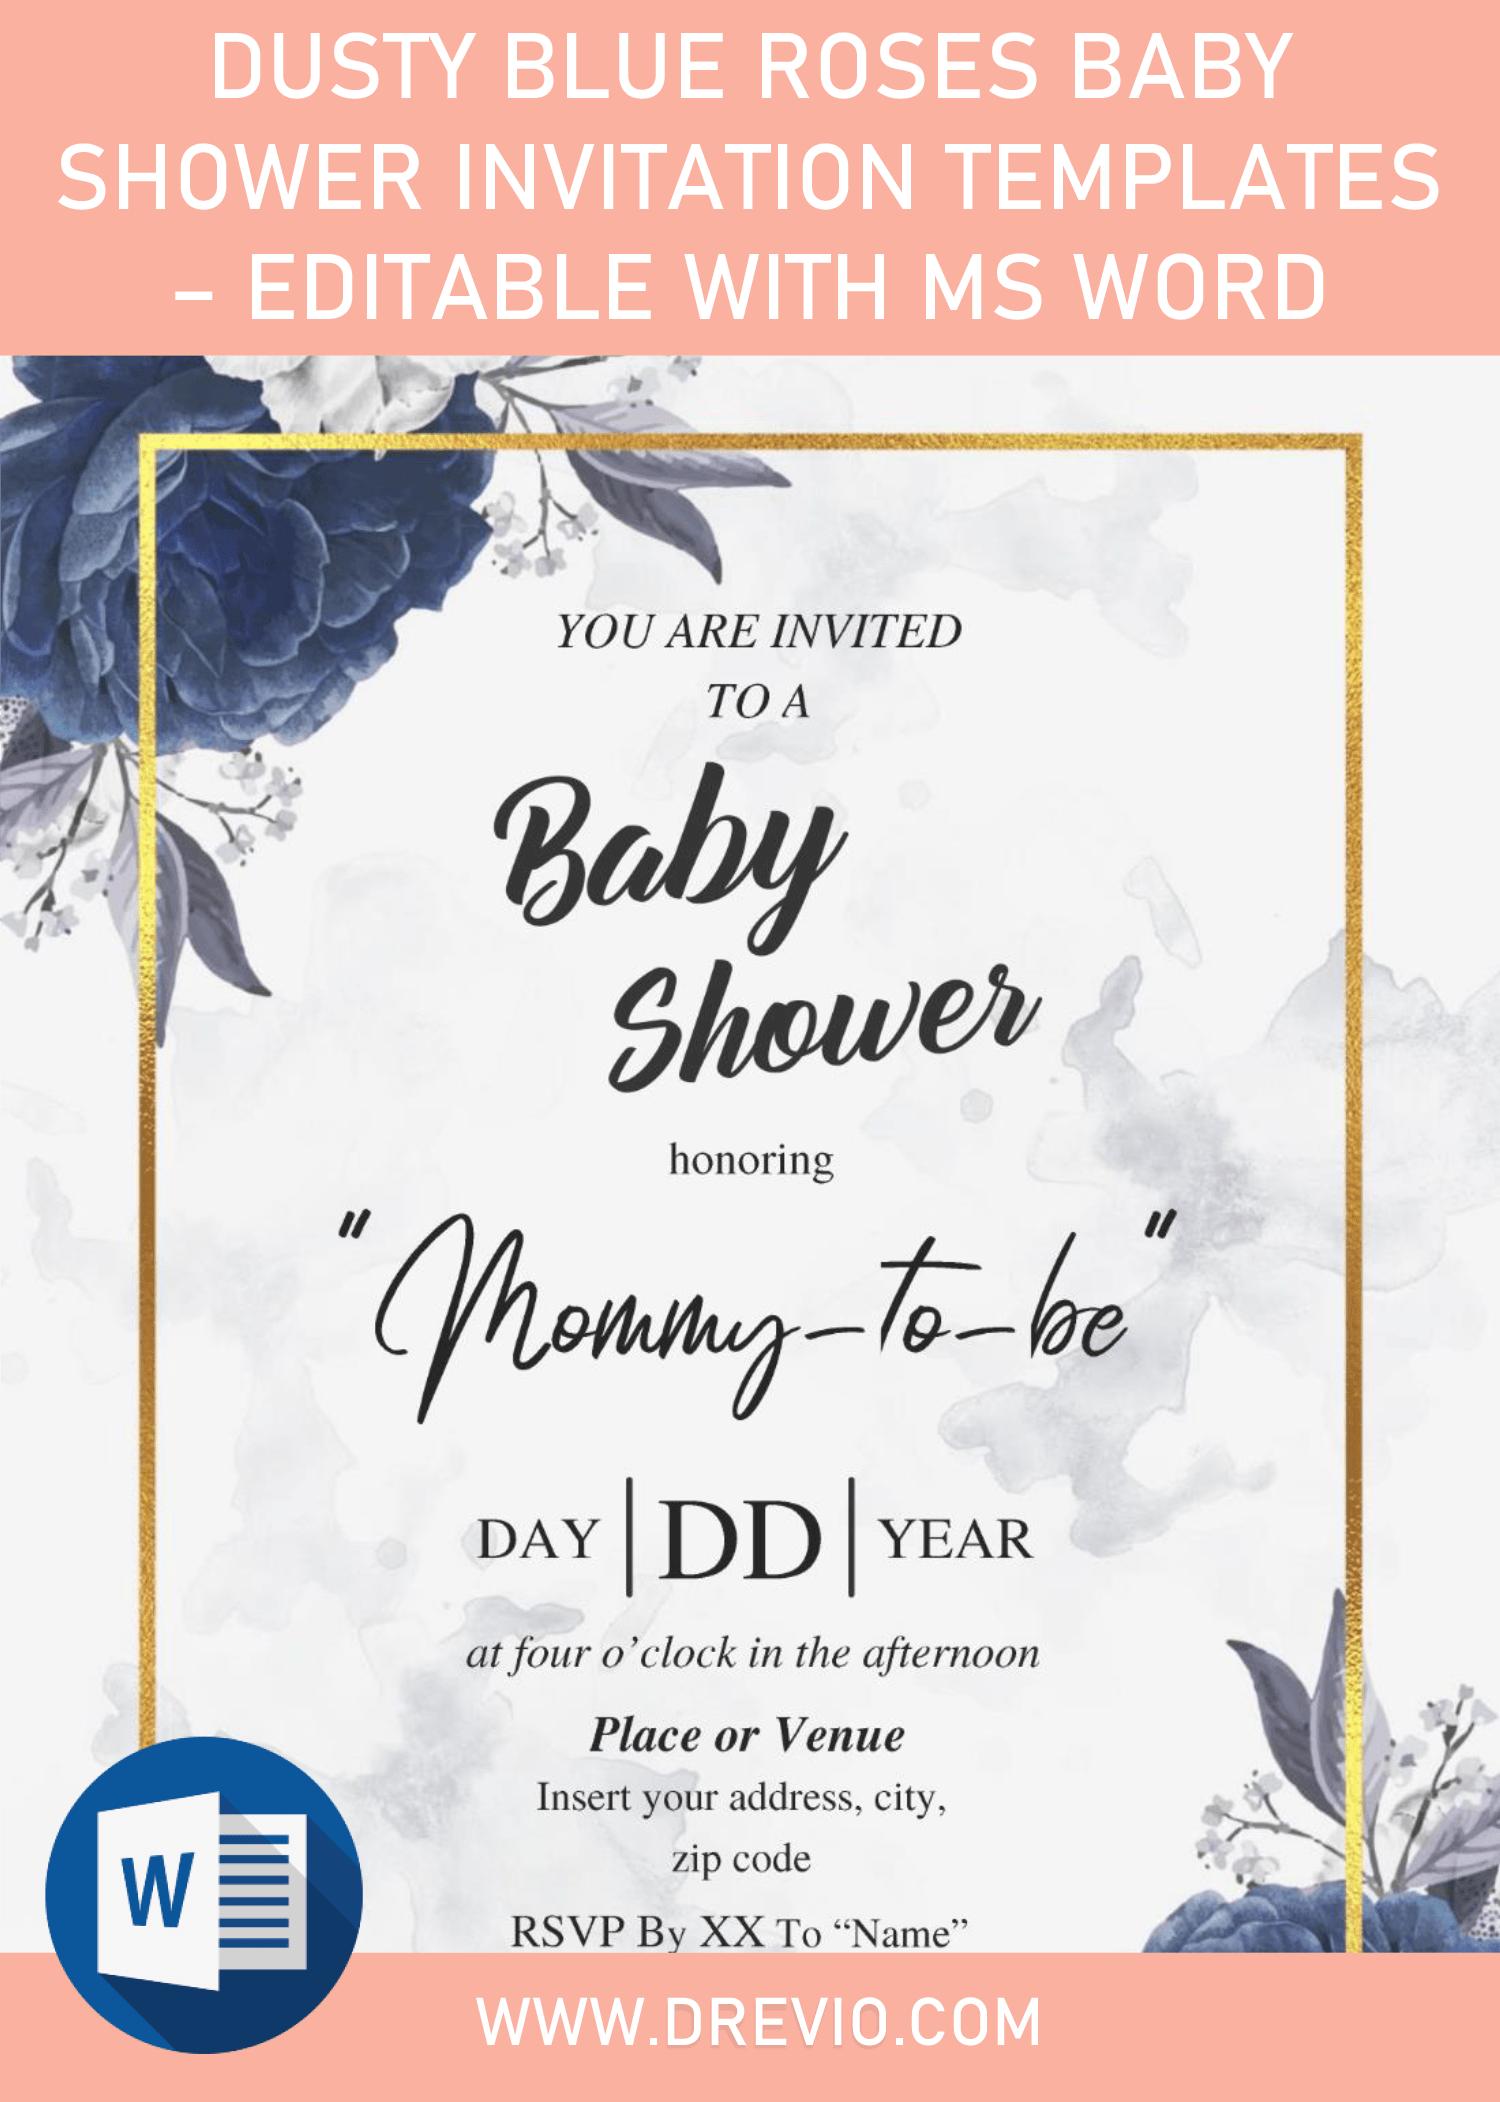 Dusty Blue Roses Baby Shower Invitation Templates - Editable With MS Word